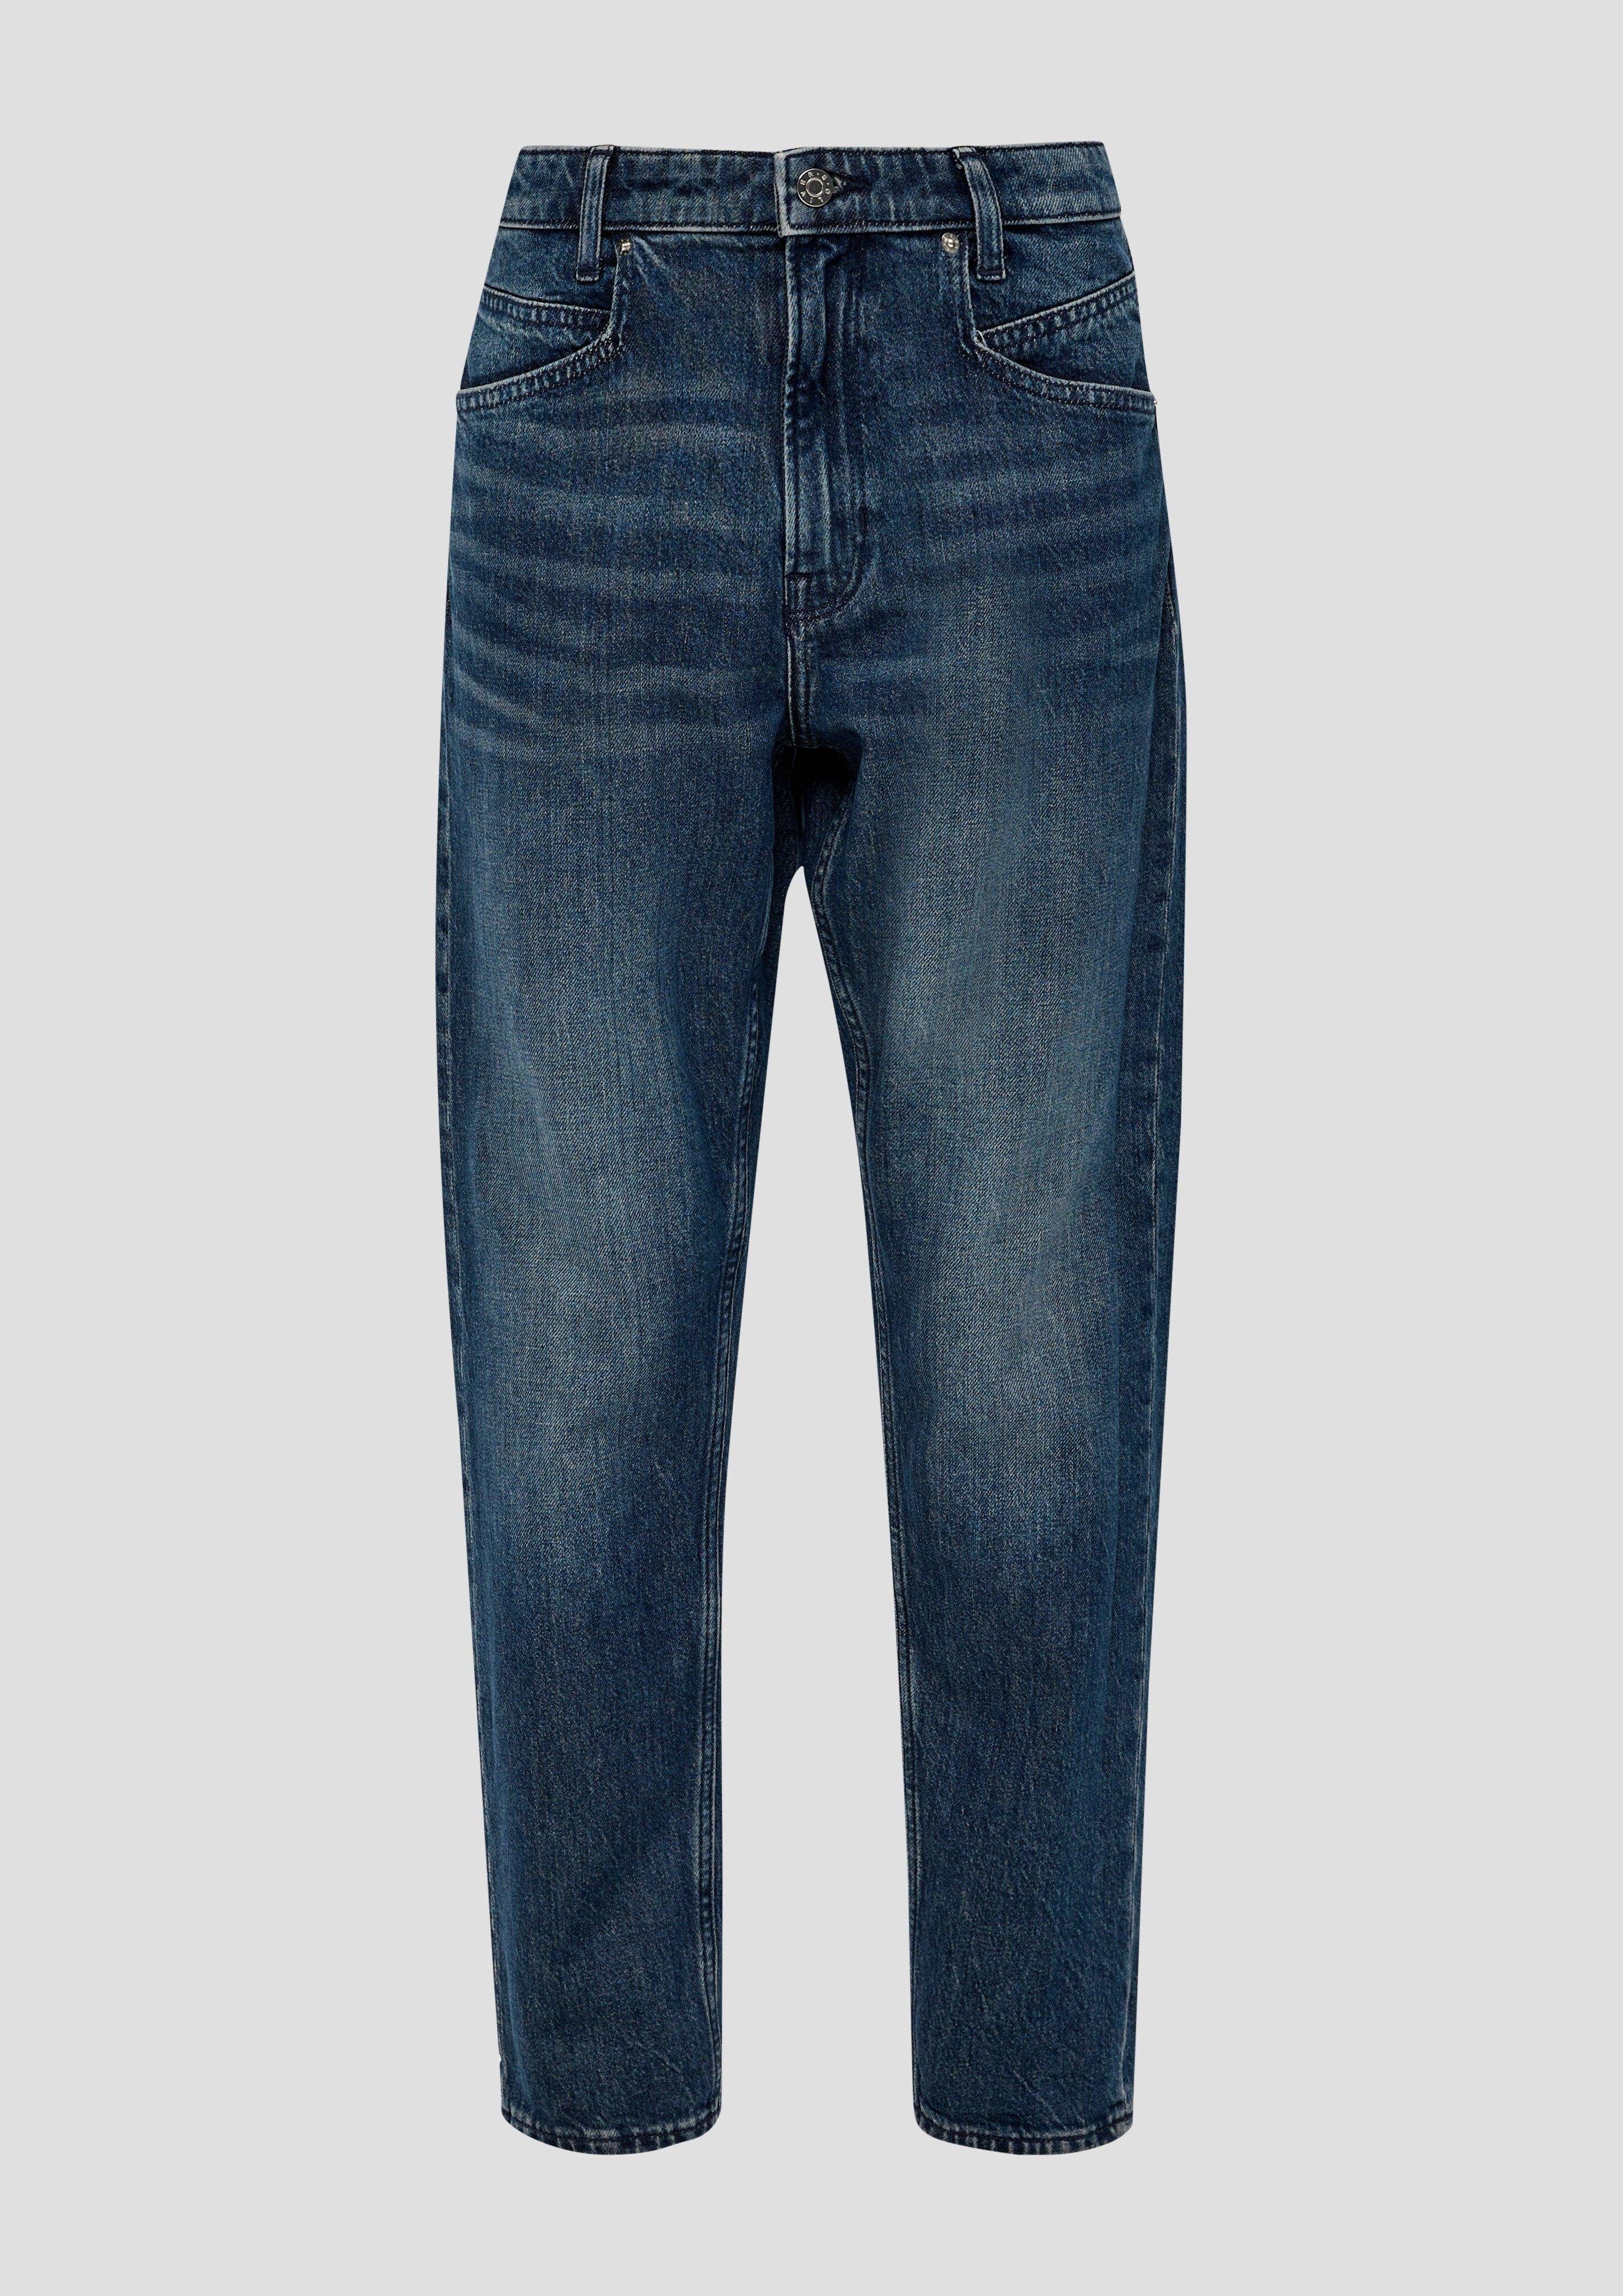 Mid Tapered / / Rise Ankle-Jeans s.Oliver / Franciz Relaxed Fit Leg Waschung, 7/8-Jeans Label-Patch